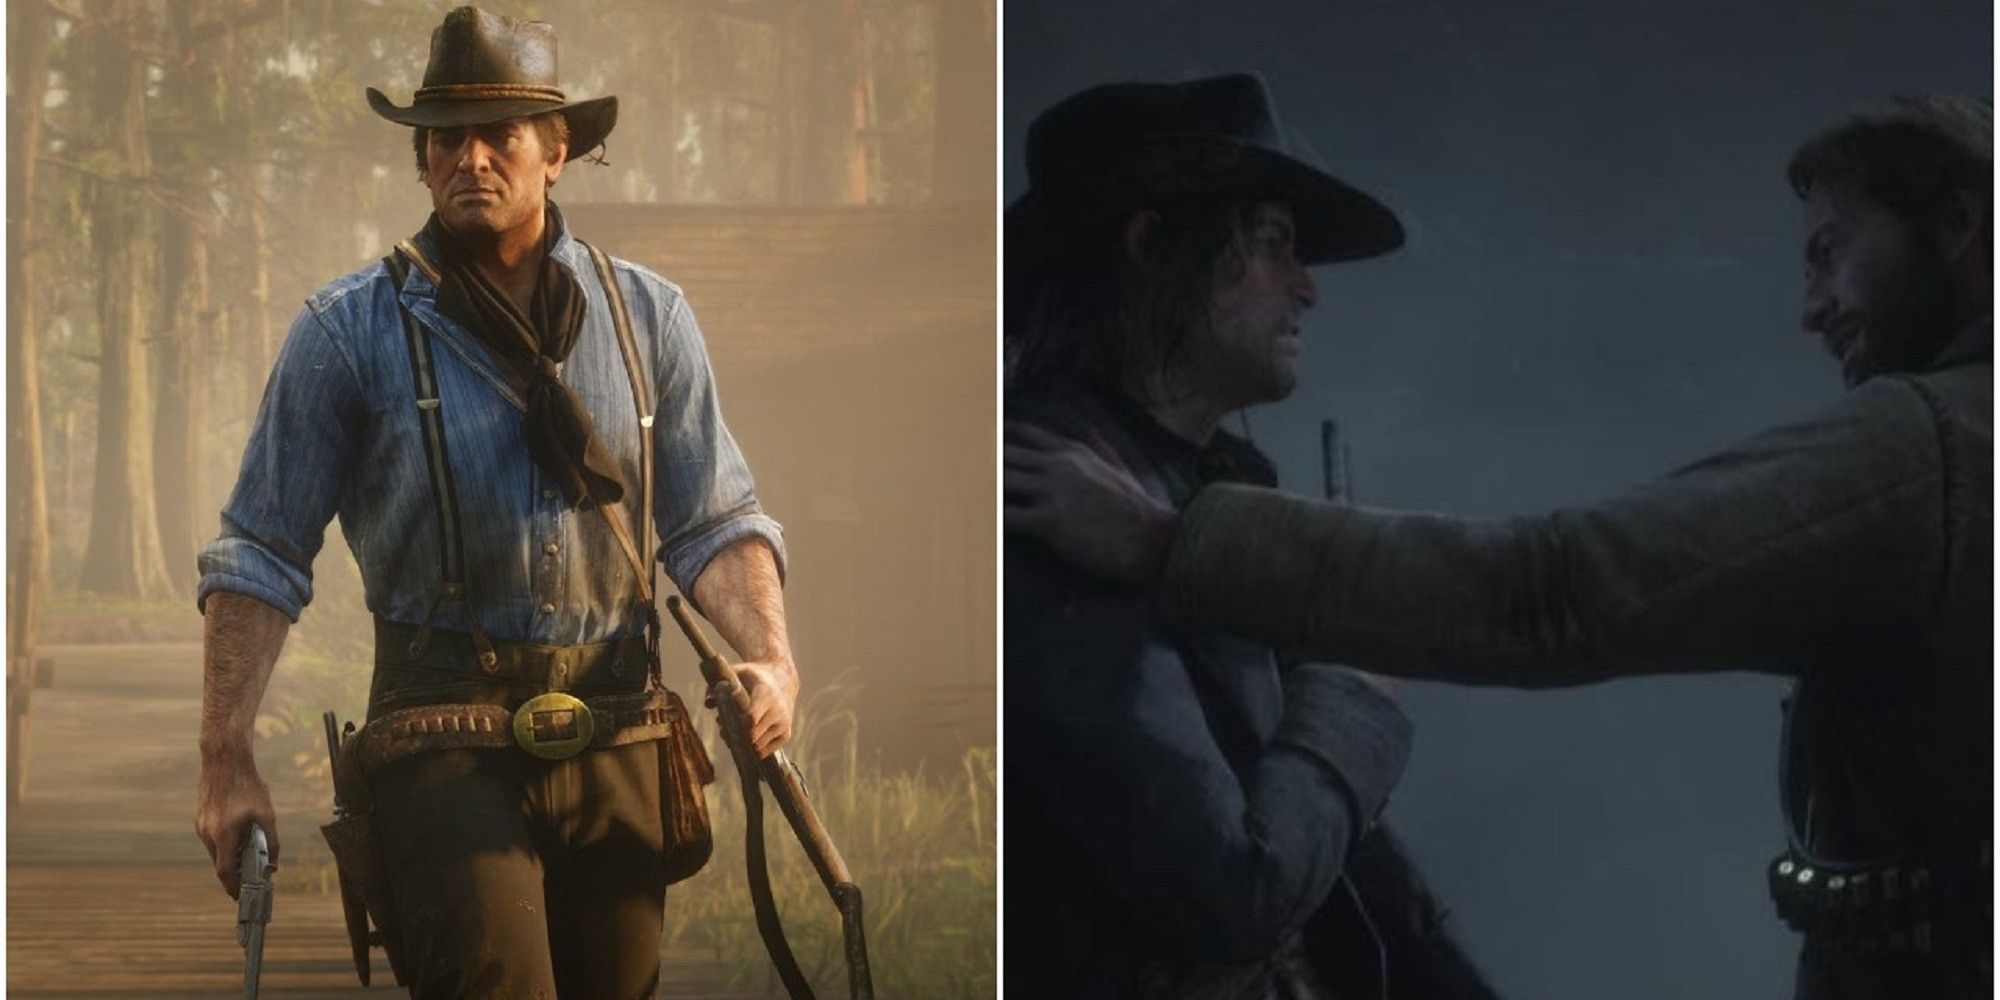 Red Dead Redemption 2 The Best Things Arthur Morgan Has The Chance To Do Ranked